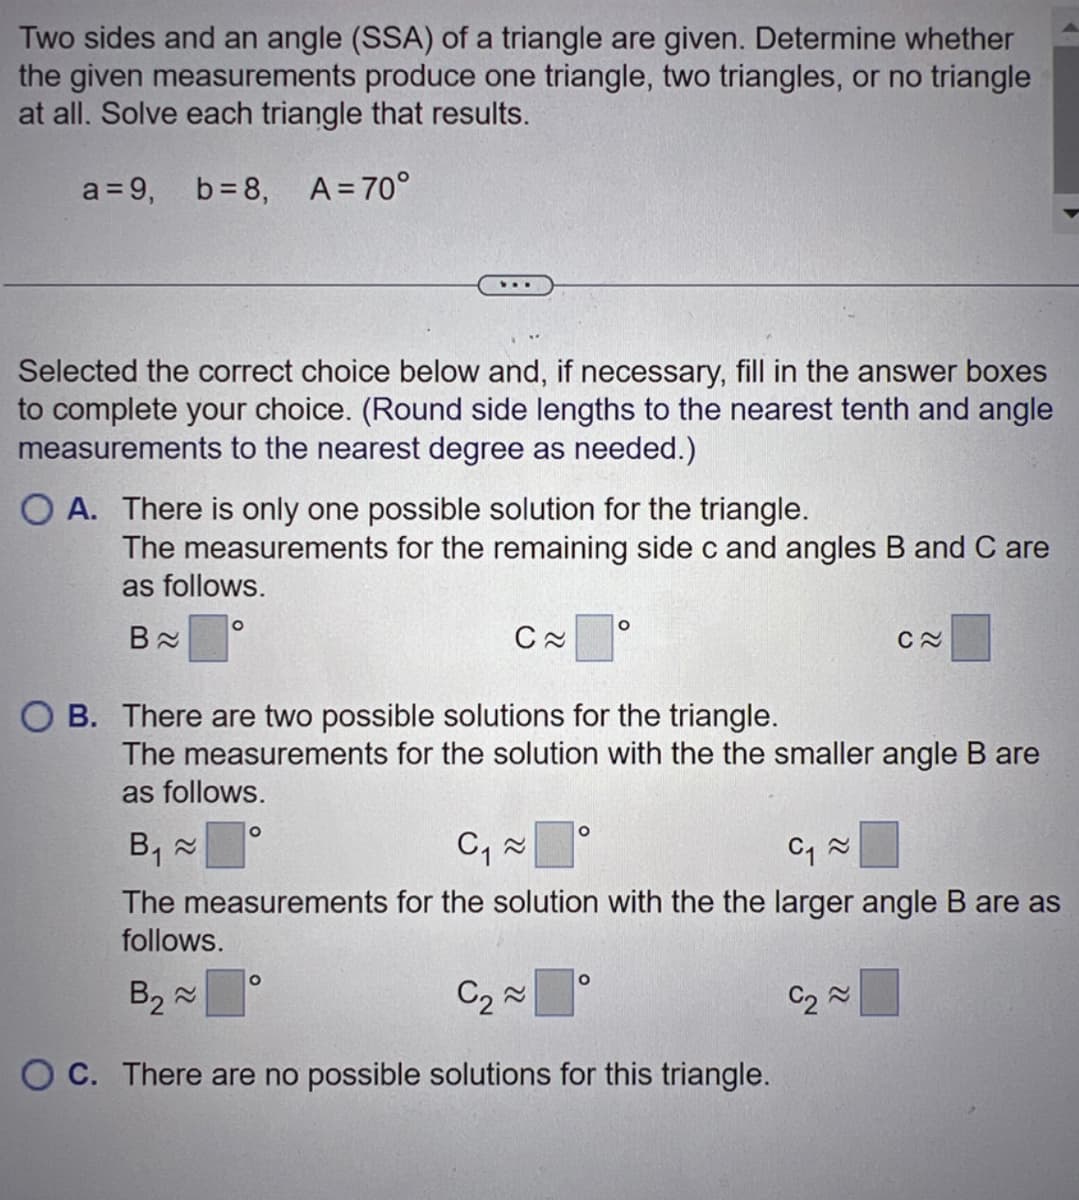 Two sides and an angle (SSA) of a triangle are given. Determine whether
the given measurements produce one triangle, two triangles, or no triangle
at all. Solve each triangle that results.
a = 9, b=8, A=70°
Selected the correct choice below and, if necessary, fill in the answer boxes
to complete your choice. (Round side lengths to the nearest tenth and angle
measurements to the nearest degree as needed.)
The measurements for the remaining side c and angles B and C are
as follows.
B≈
...
OA. There is only one possible solution for the triangle.
O
O
C≈
O
B. There are two possible solutions for the triangle.
The measurements for the solution with the the smaller angle B are
as follows.
C₁~
≈
O
O
B₁ ≈
C₁~
The measurements for the solution with the the larger angle B are as
follows.
B₂~
C₂~
OC. There are no possible solutions for this triangle.
O
C≈
C₂~